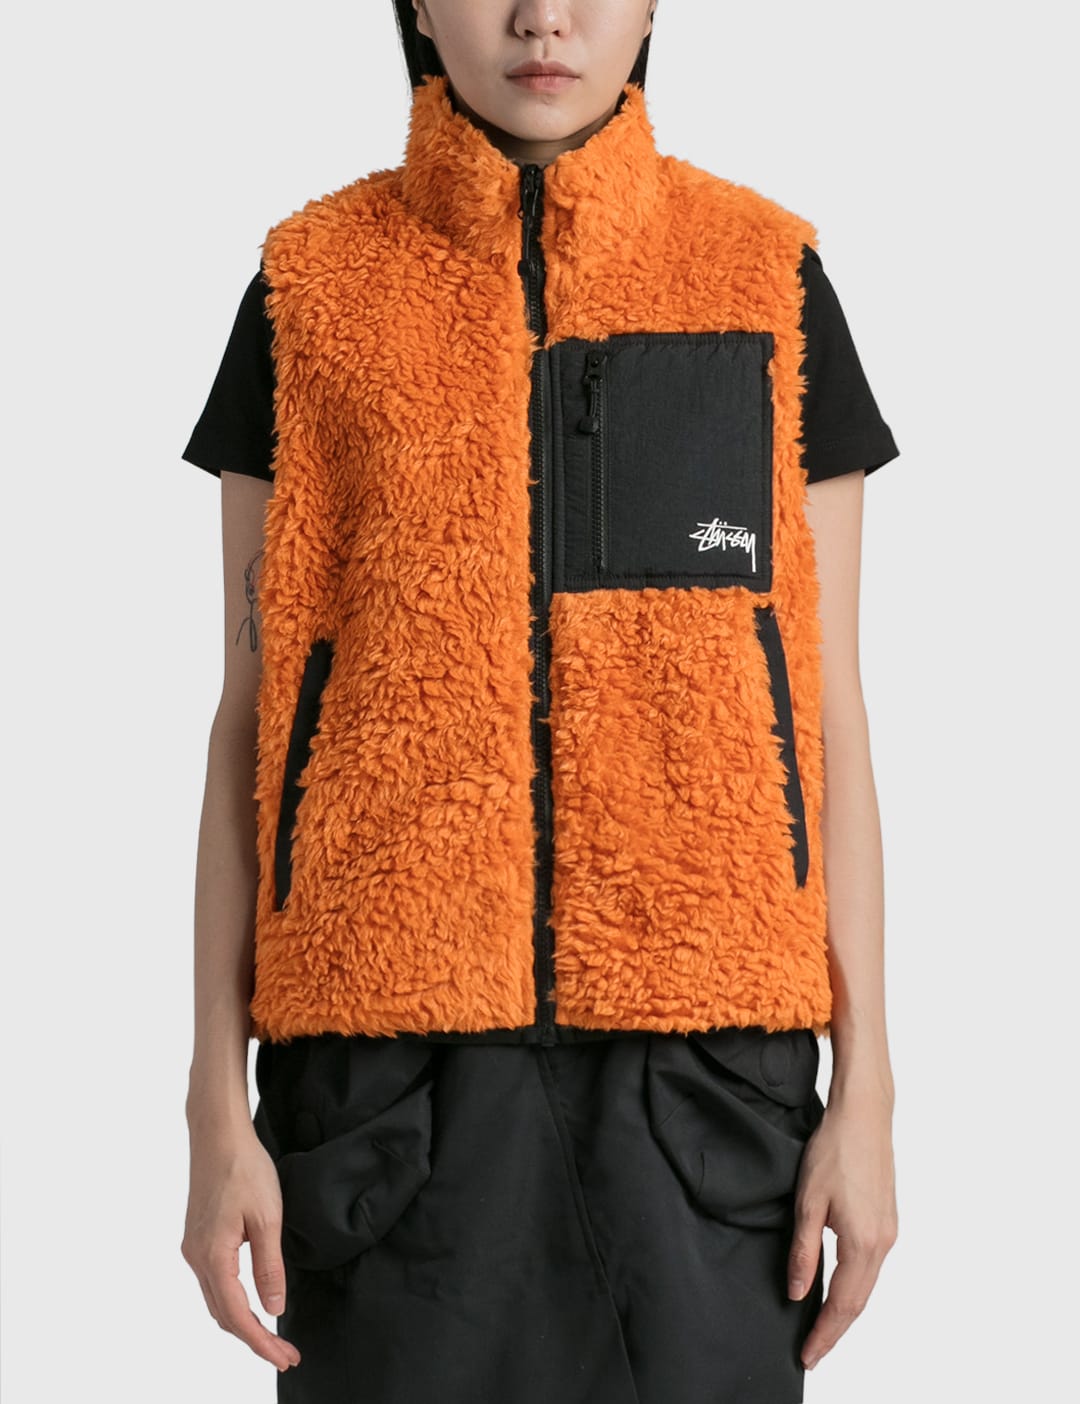 Stüssy - Sherpa Vest | HBX - Globally Curated Fashion and Lifestyle 